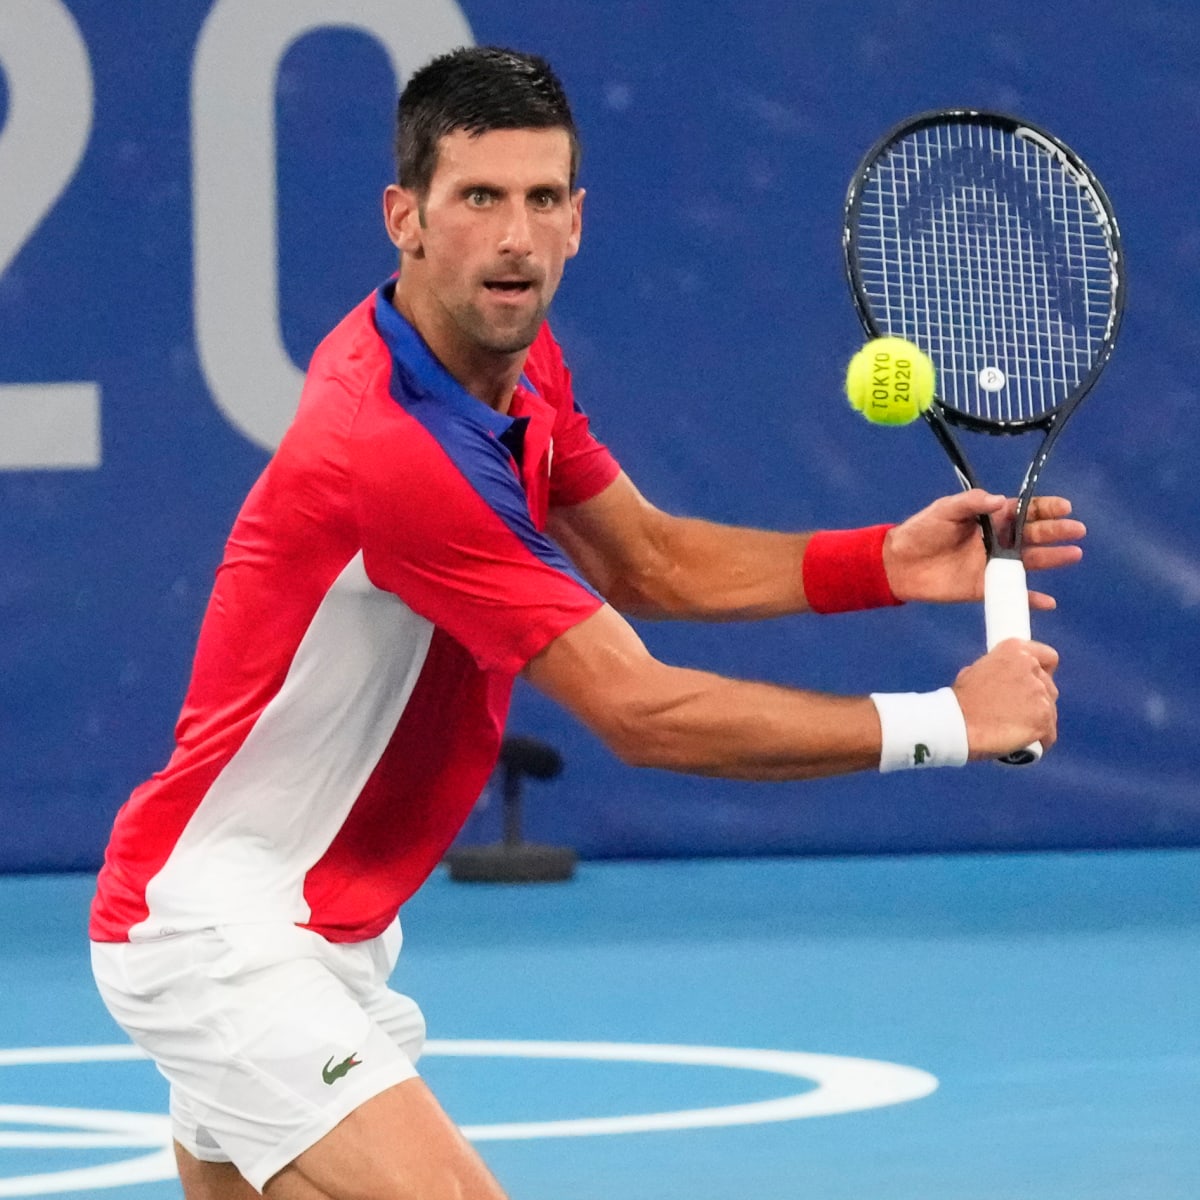 Djokovic v Medvedev Free Live Stream US Open Tennis Championship - How to Watch and Stream Major League and College Sports